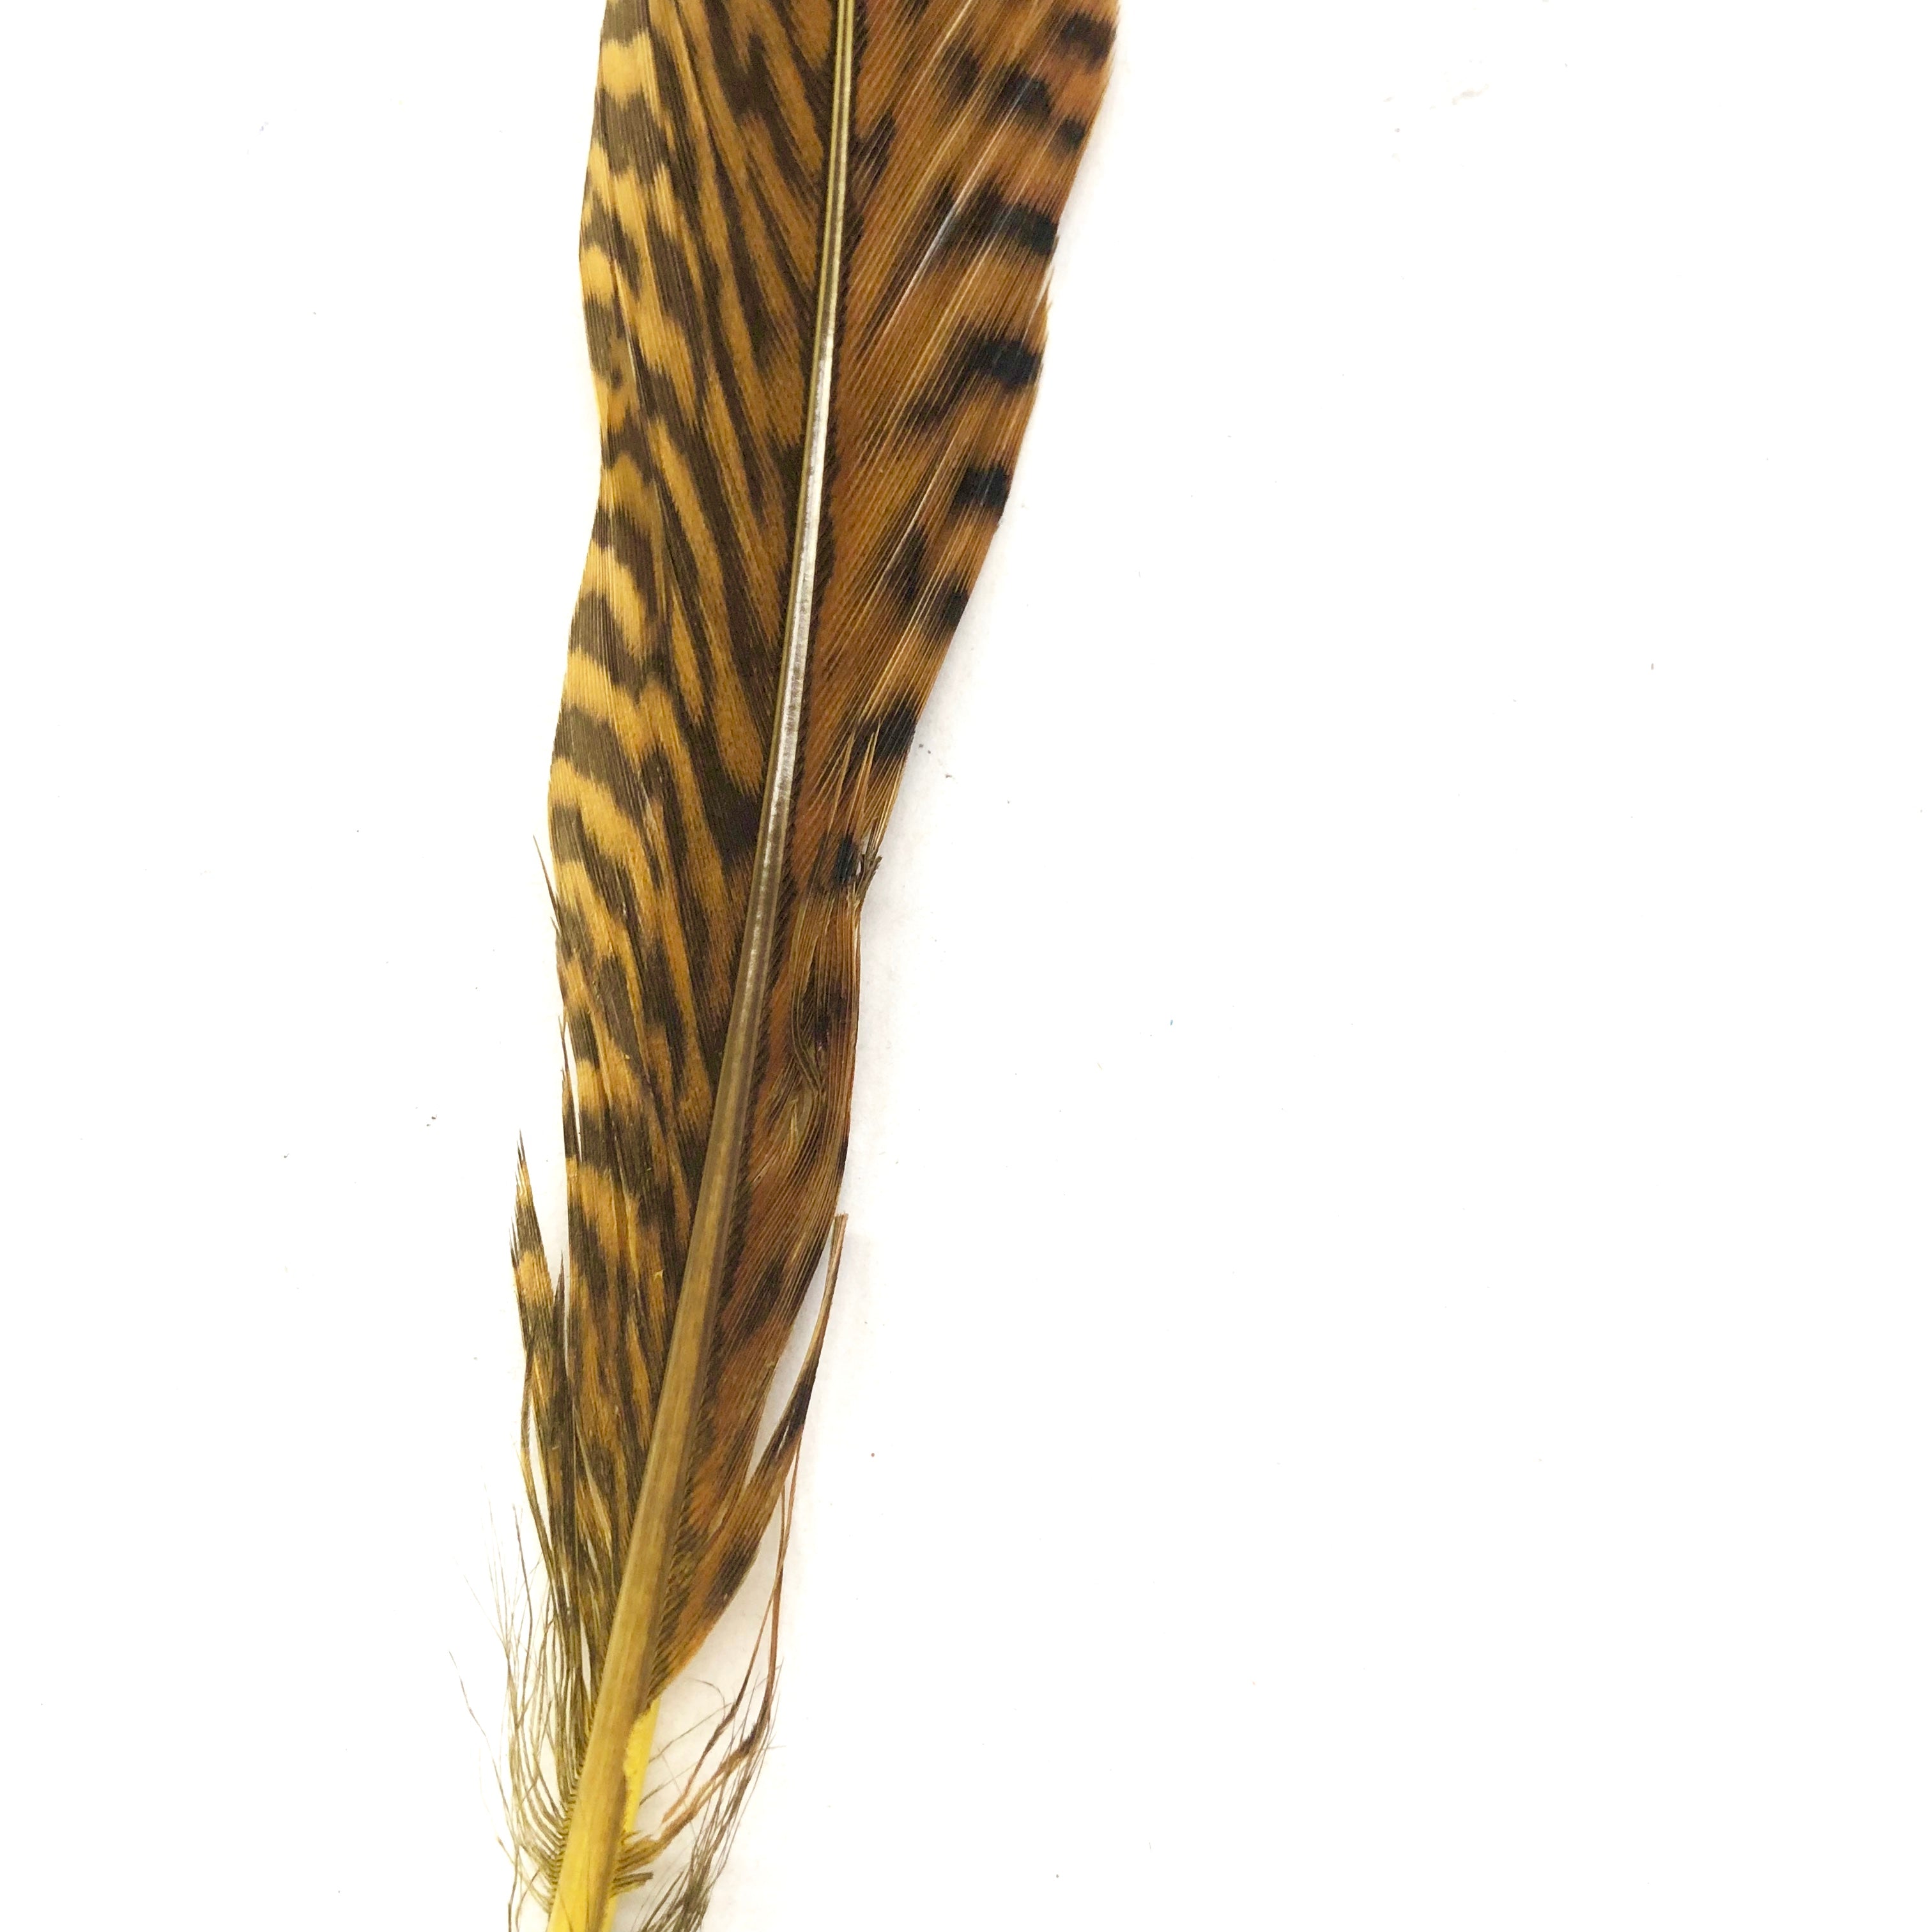 6" to 10" Golden Pheasant Side Tail Feather x 10 pcs - Yellow